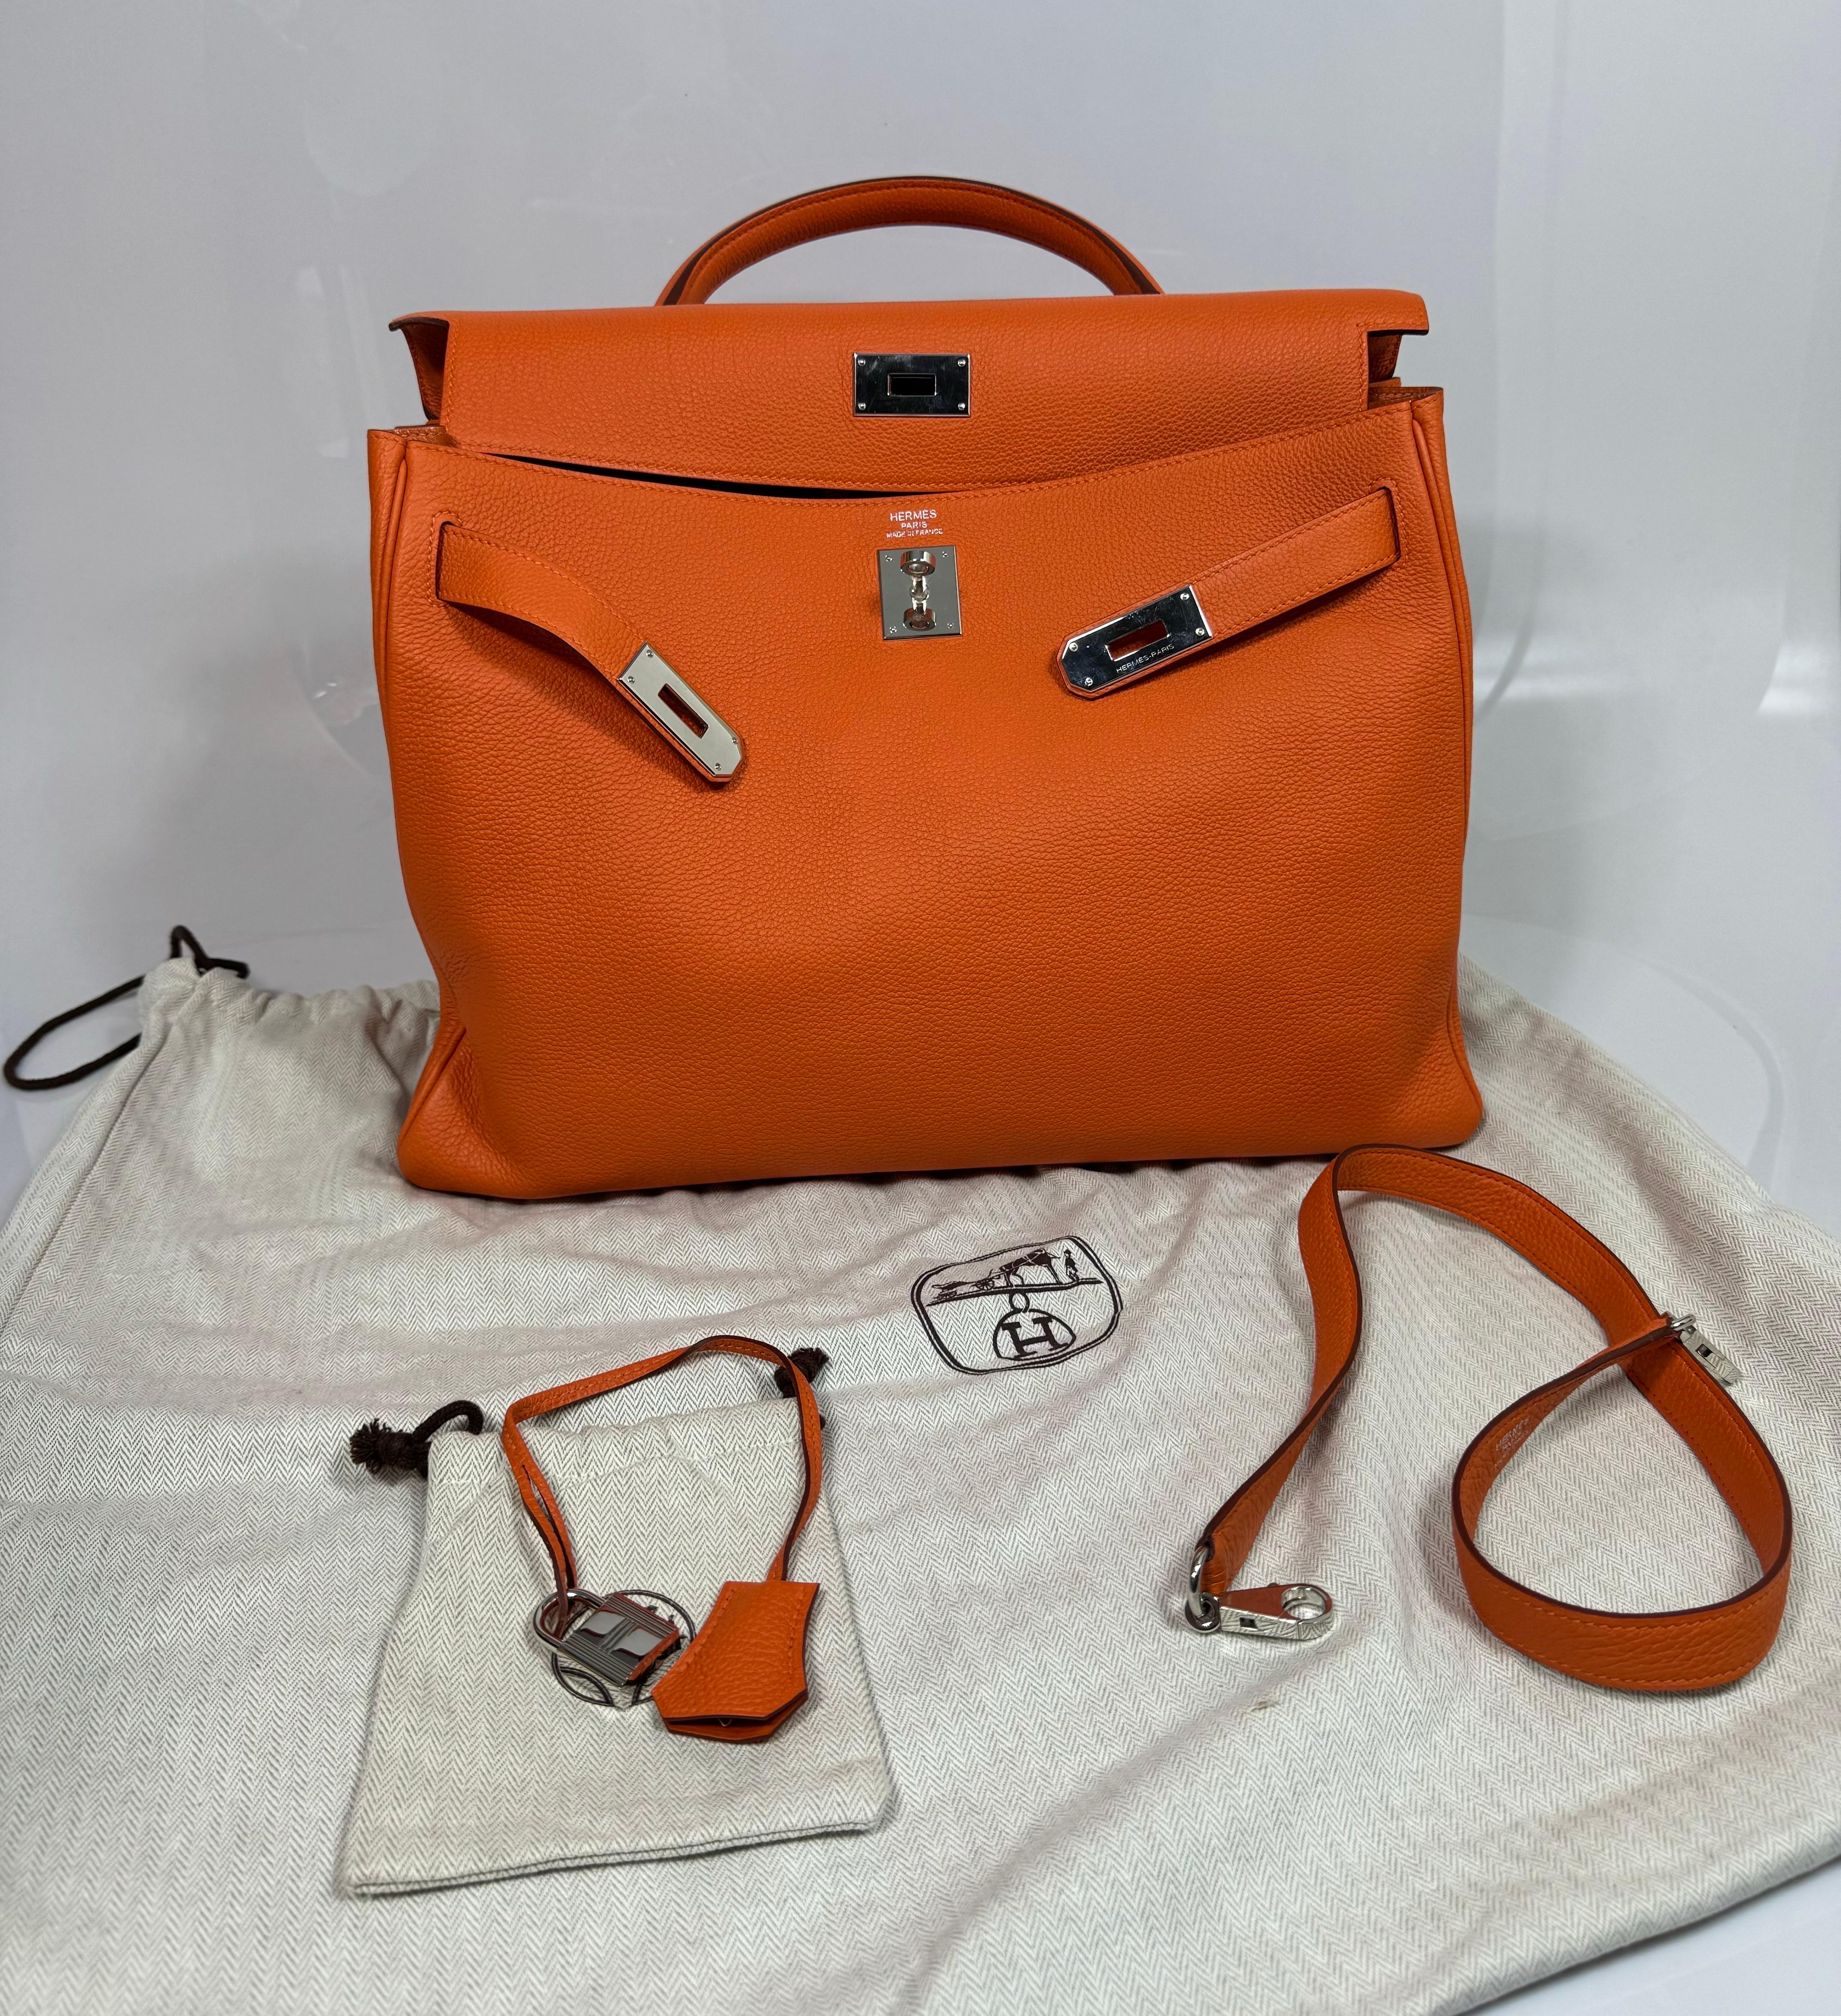 Hermes 40cm Orange Togo Kelly Retourne-2011-SHW In Excellent Condition For Sale In West Palm Beach, FL